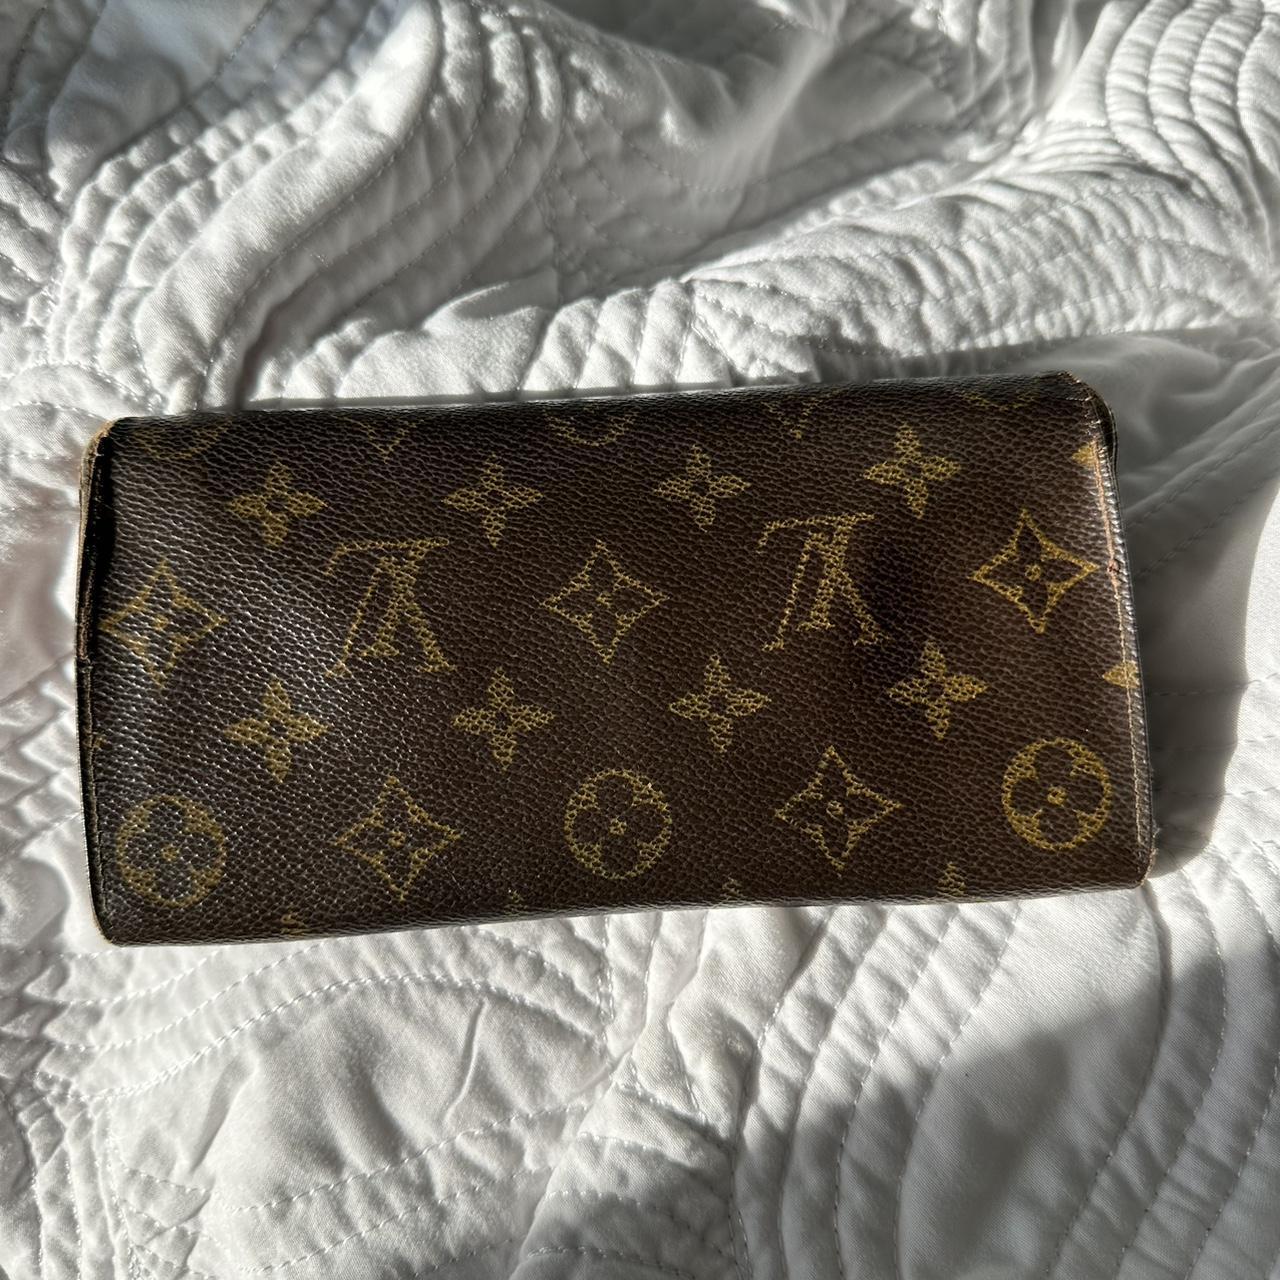 AUTHENTIC LV Wallet , Very worn but still works